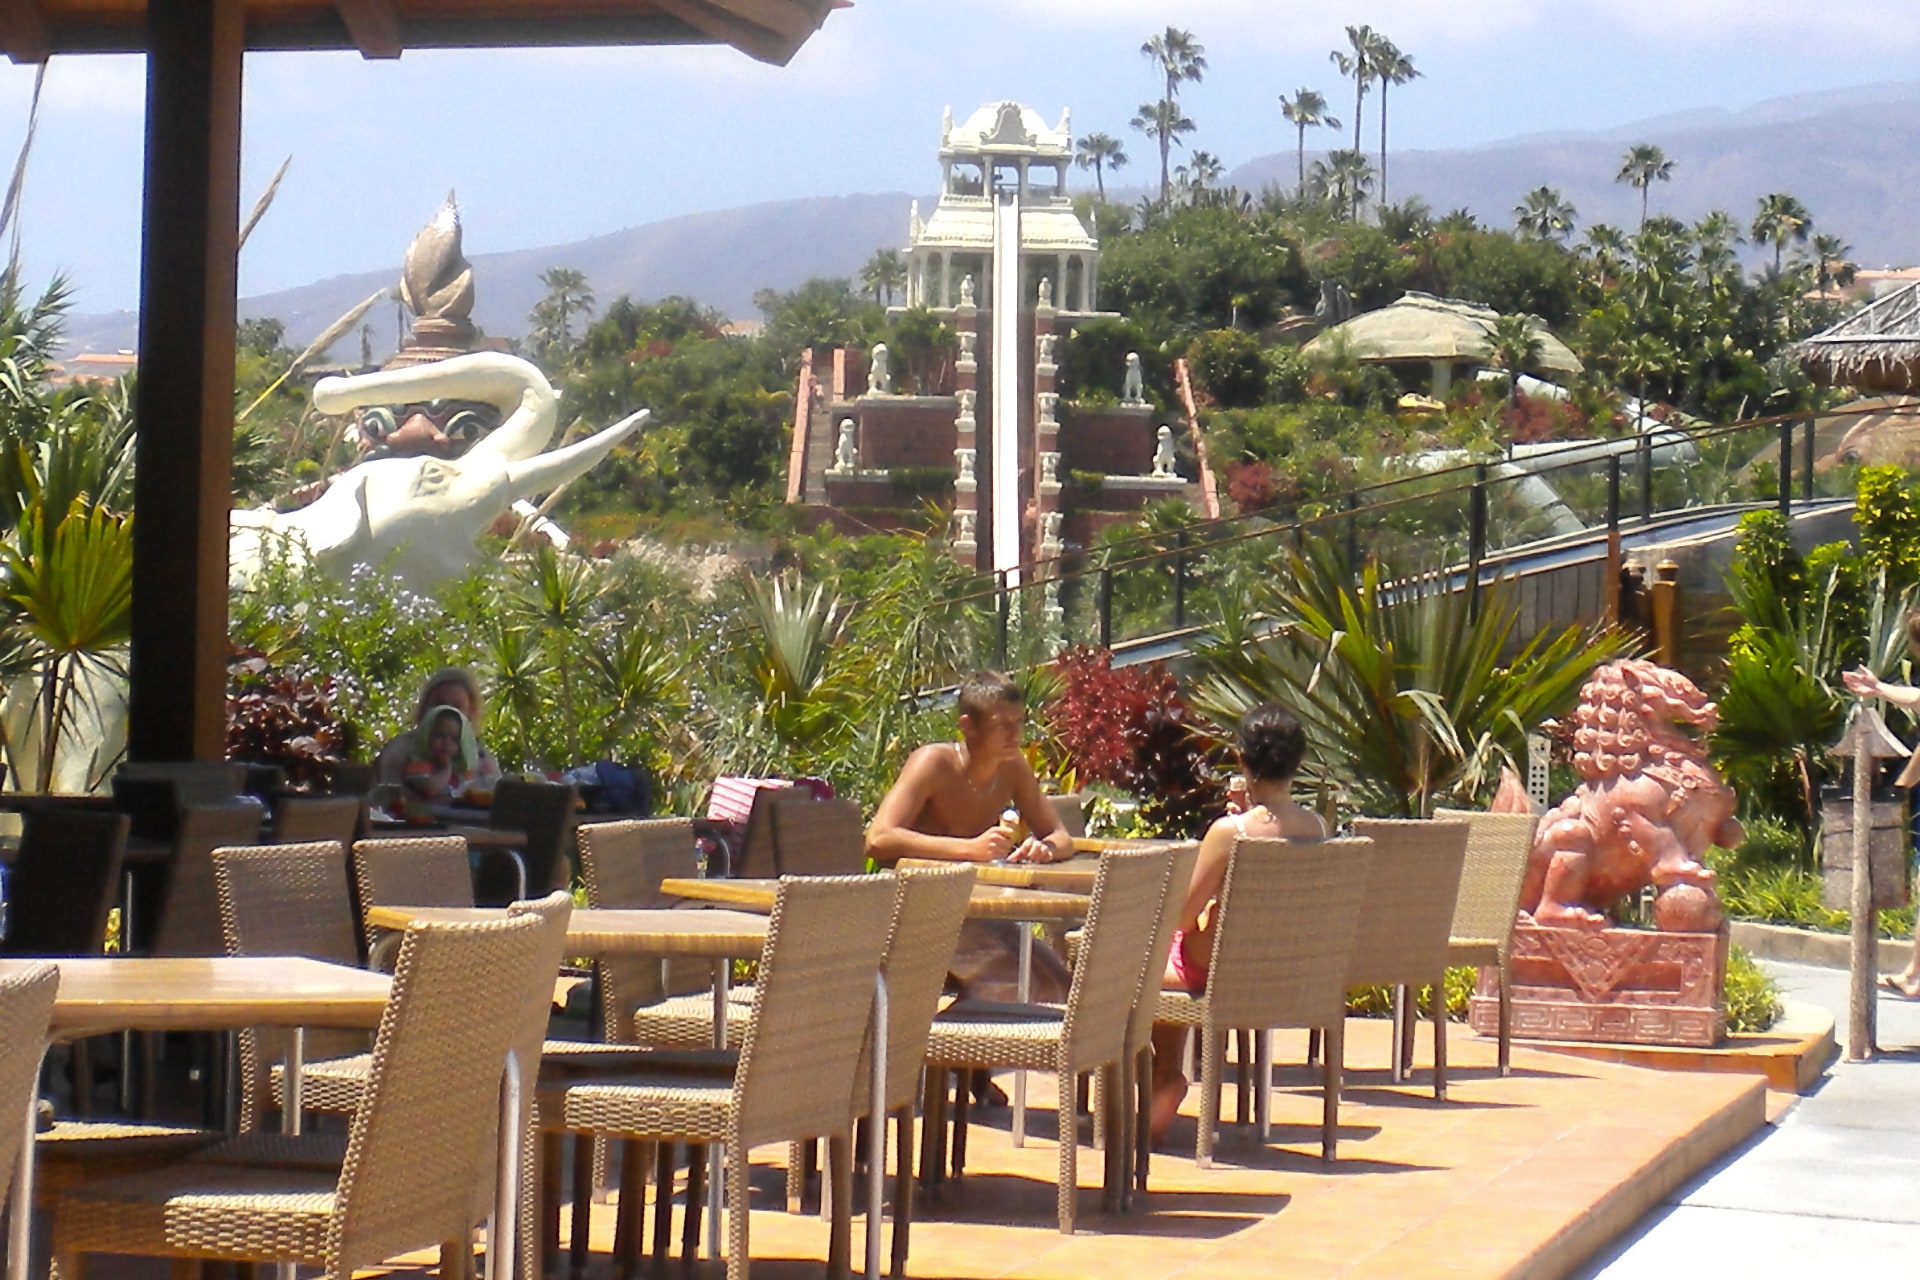 Vibrant food zone at Siam Park, Tenerife, offering a variety of culinary delights and dining options